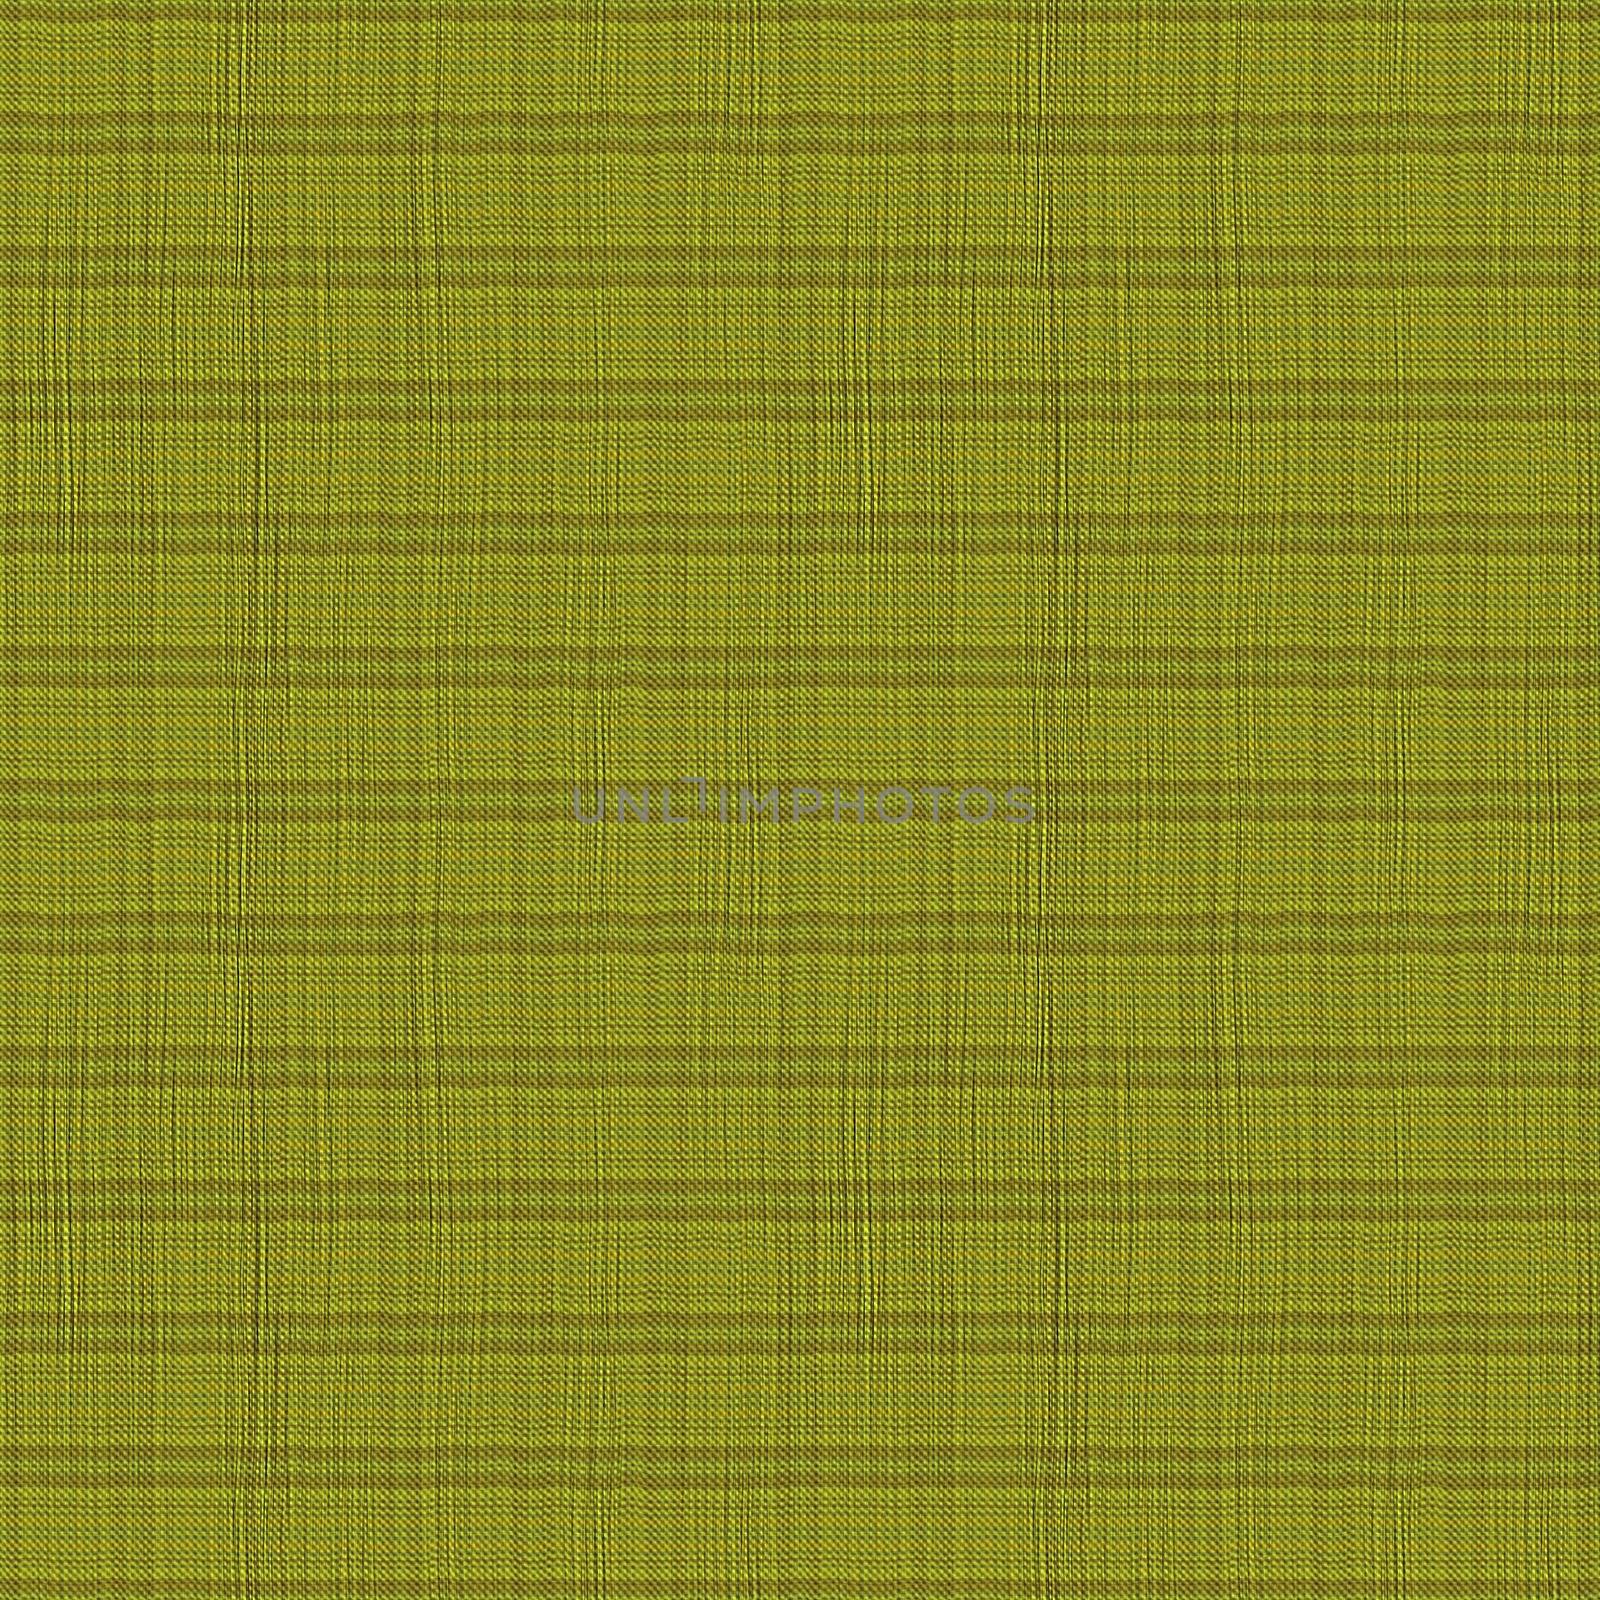 Square piece of textile material other than in Scottish style